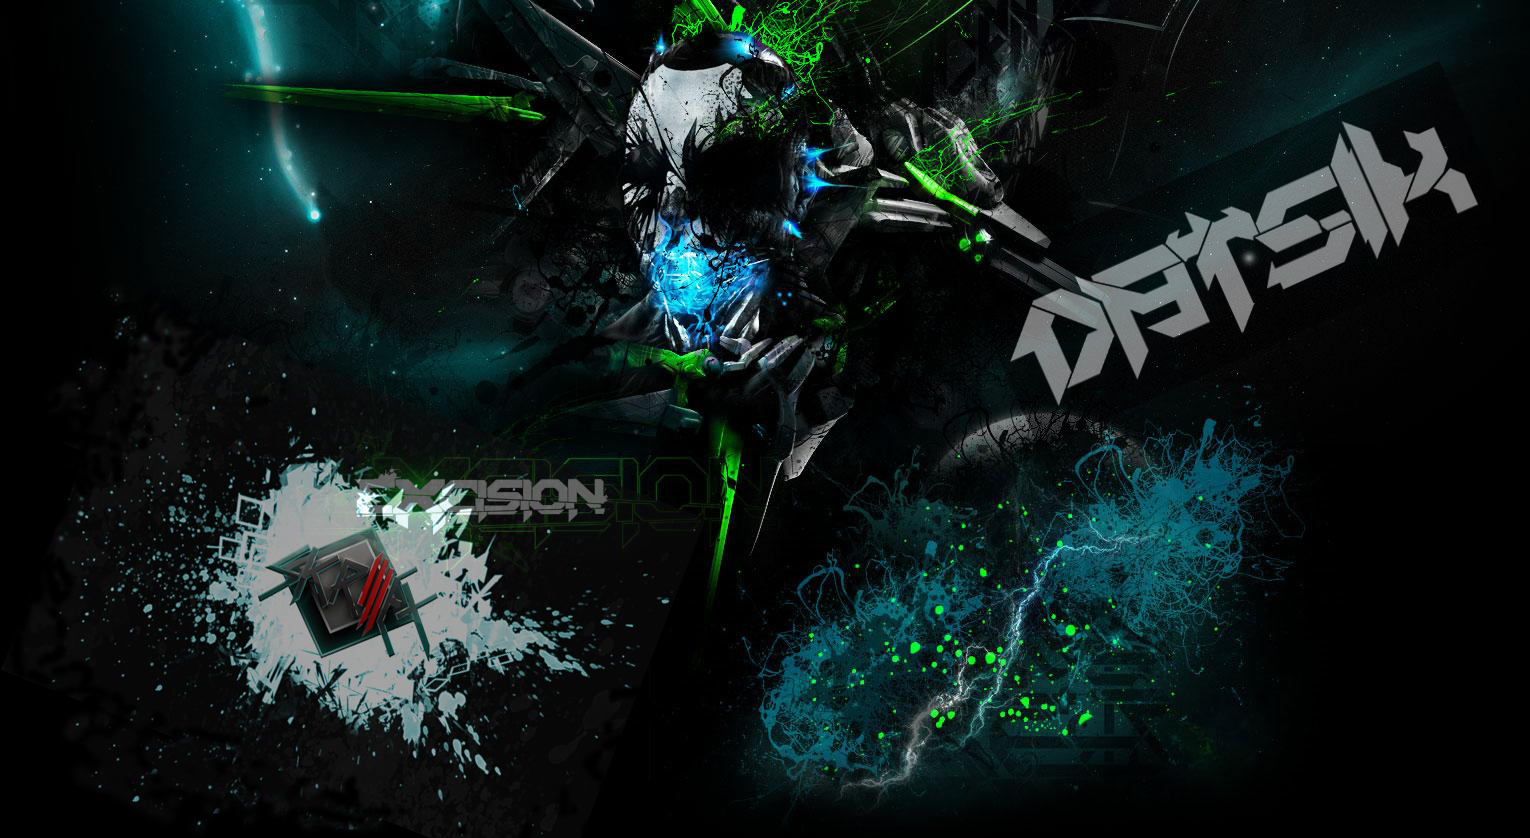 DeviantArt More Like Excition Datsik Skrillex wallp by Cyb3rdr4g0nGR